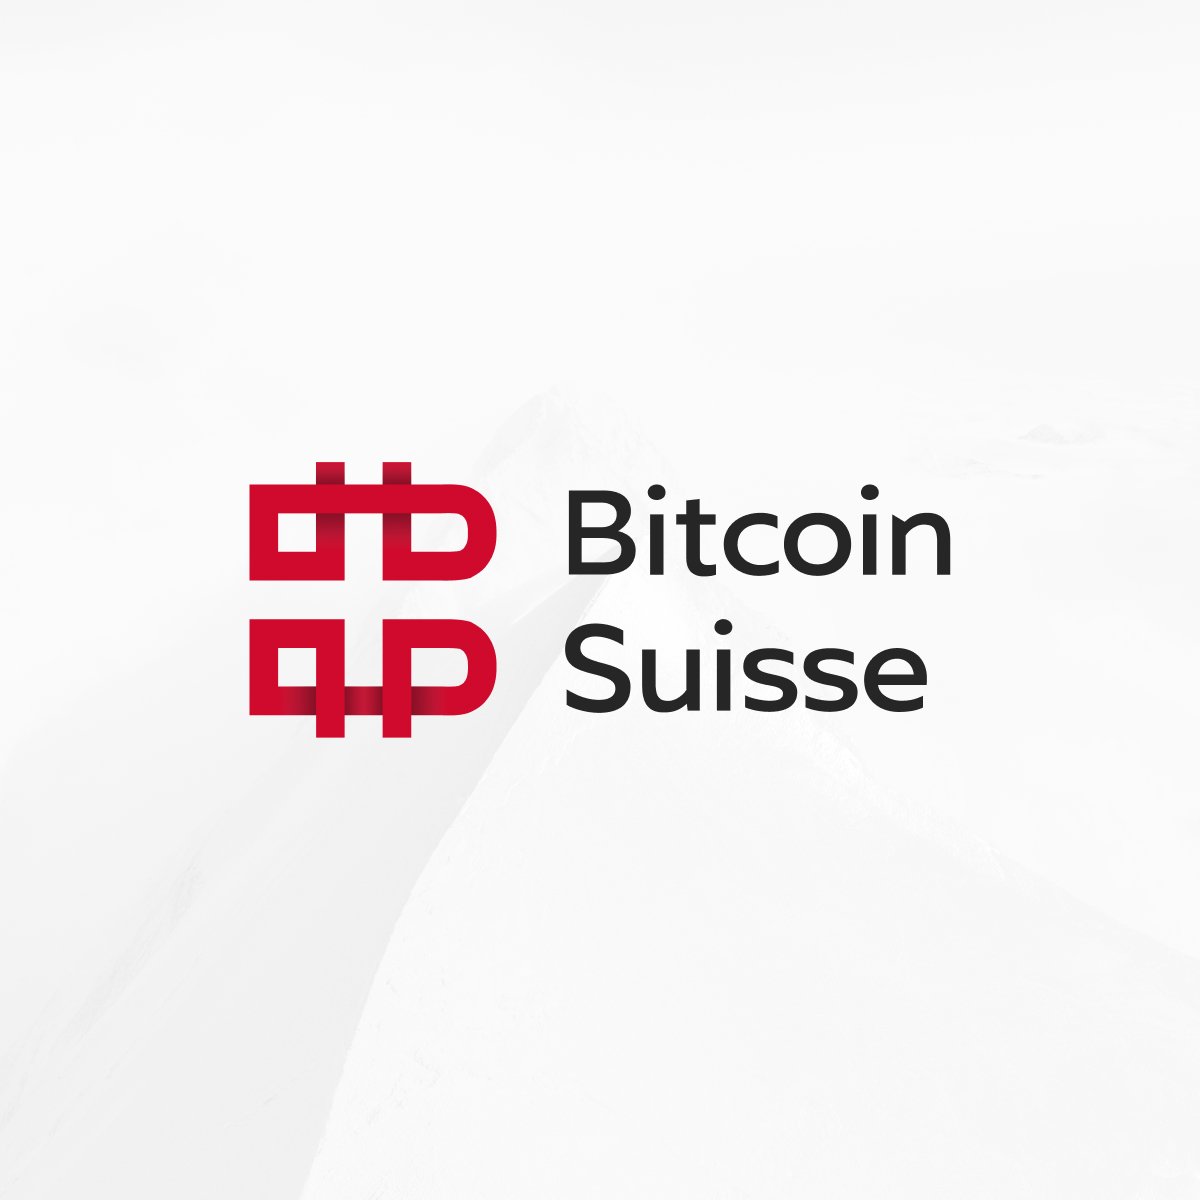 Bitcoin Suisse (Courtesy: Twitter)